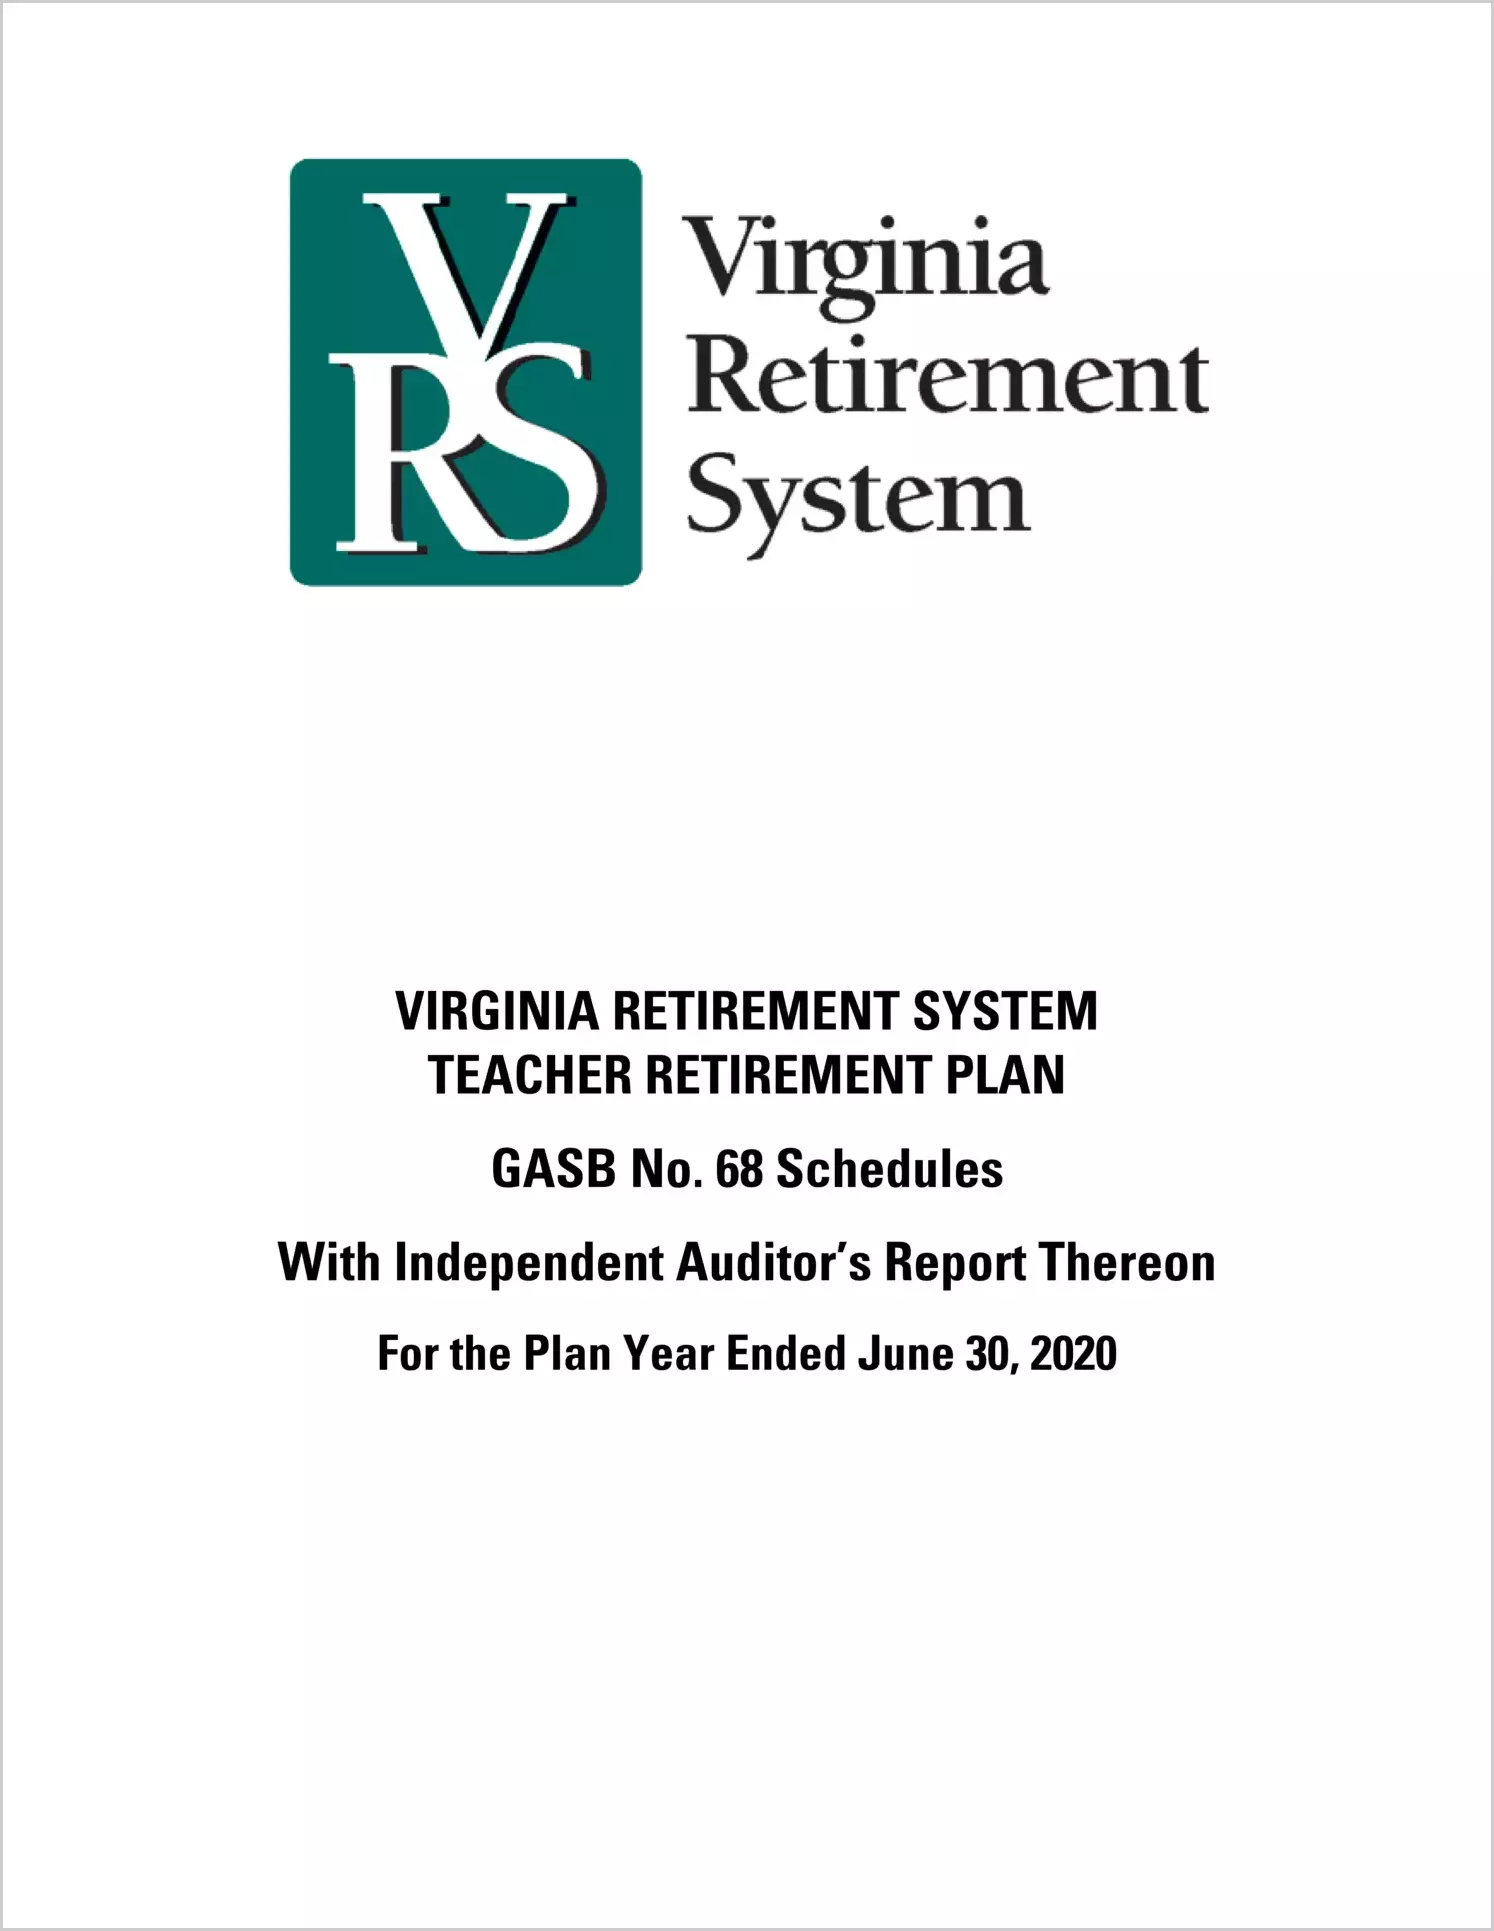 GASB 68 Schedule - Virginia Retirement System Teacher Retirement Plan for the year ended June 30, 2020